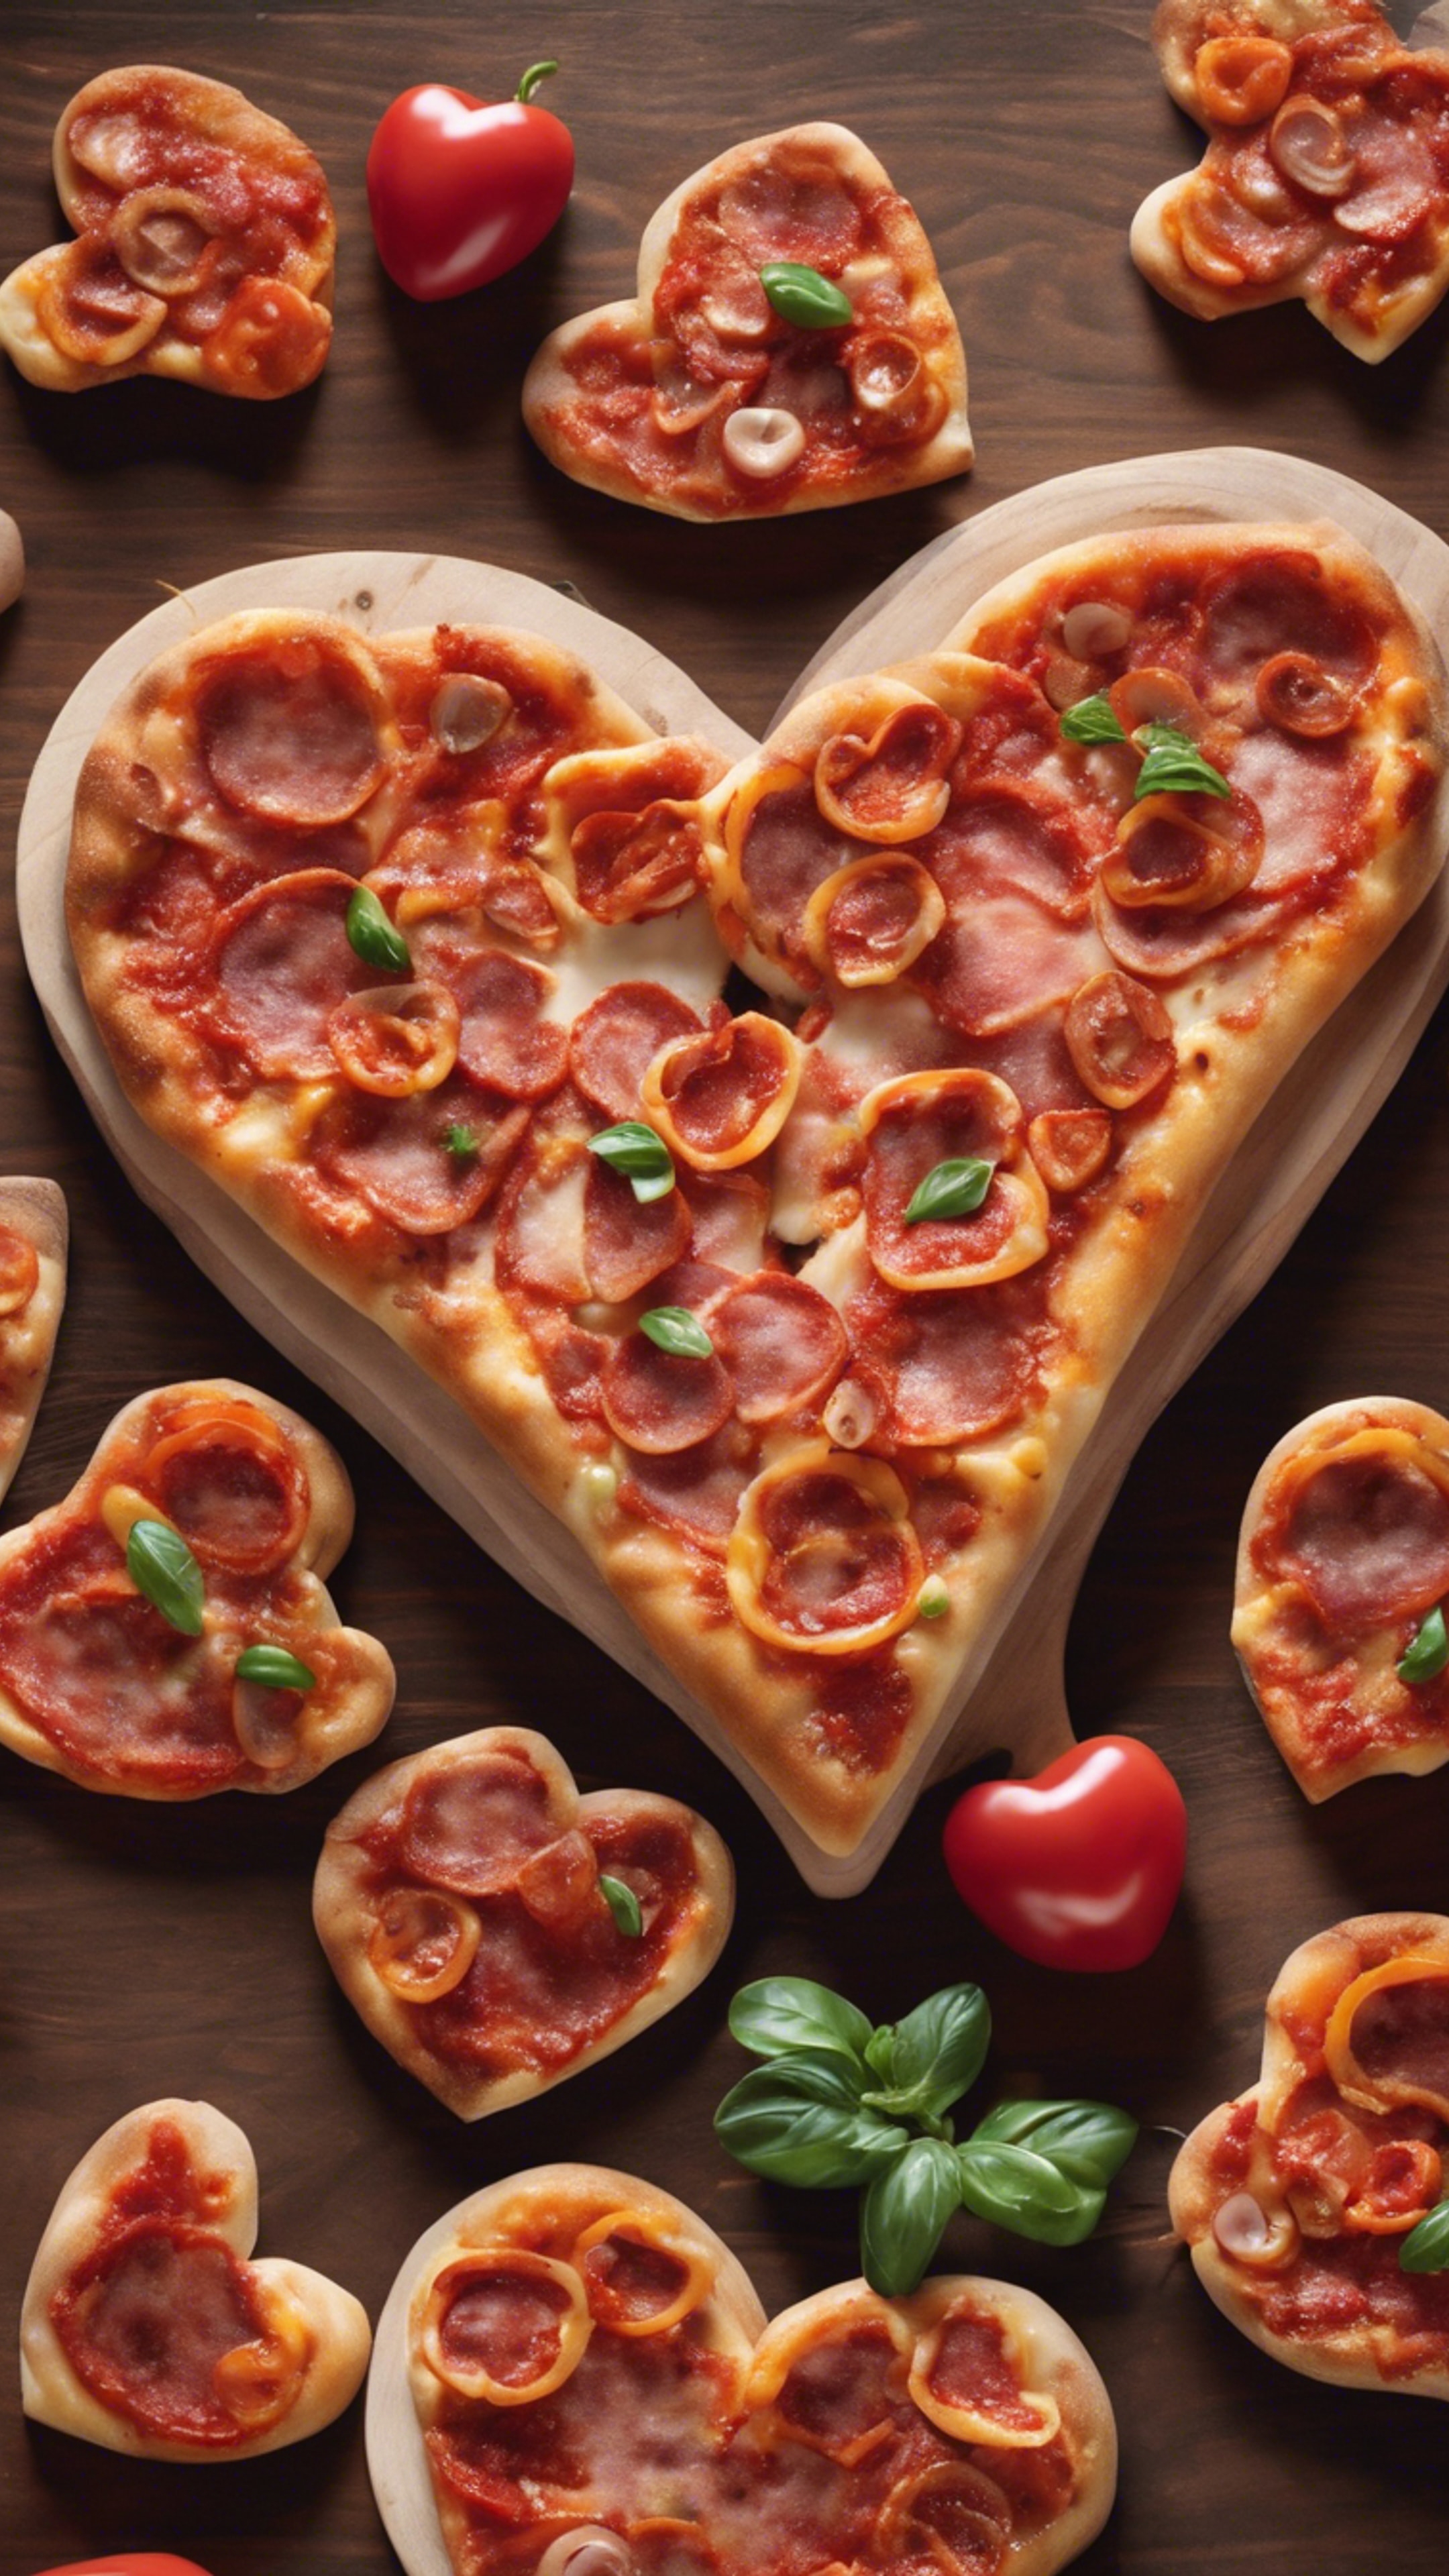 A heart-shaped pizza topped with pepperonis arranged in a smaller heart shape, the perfect cuisine for a romantic date. Tapeta[15df62b77c2f46a18143]